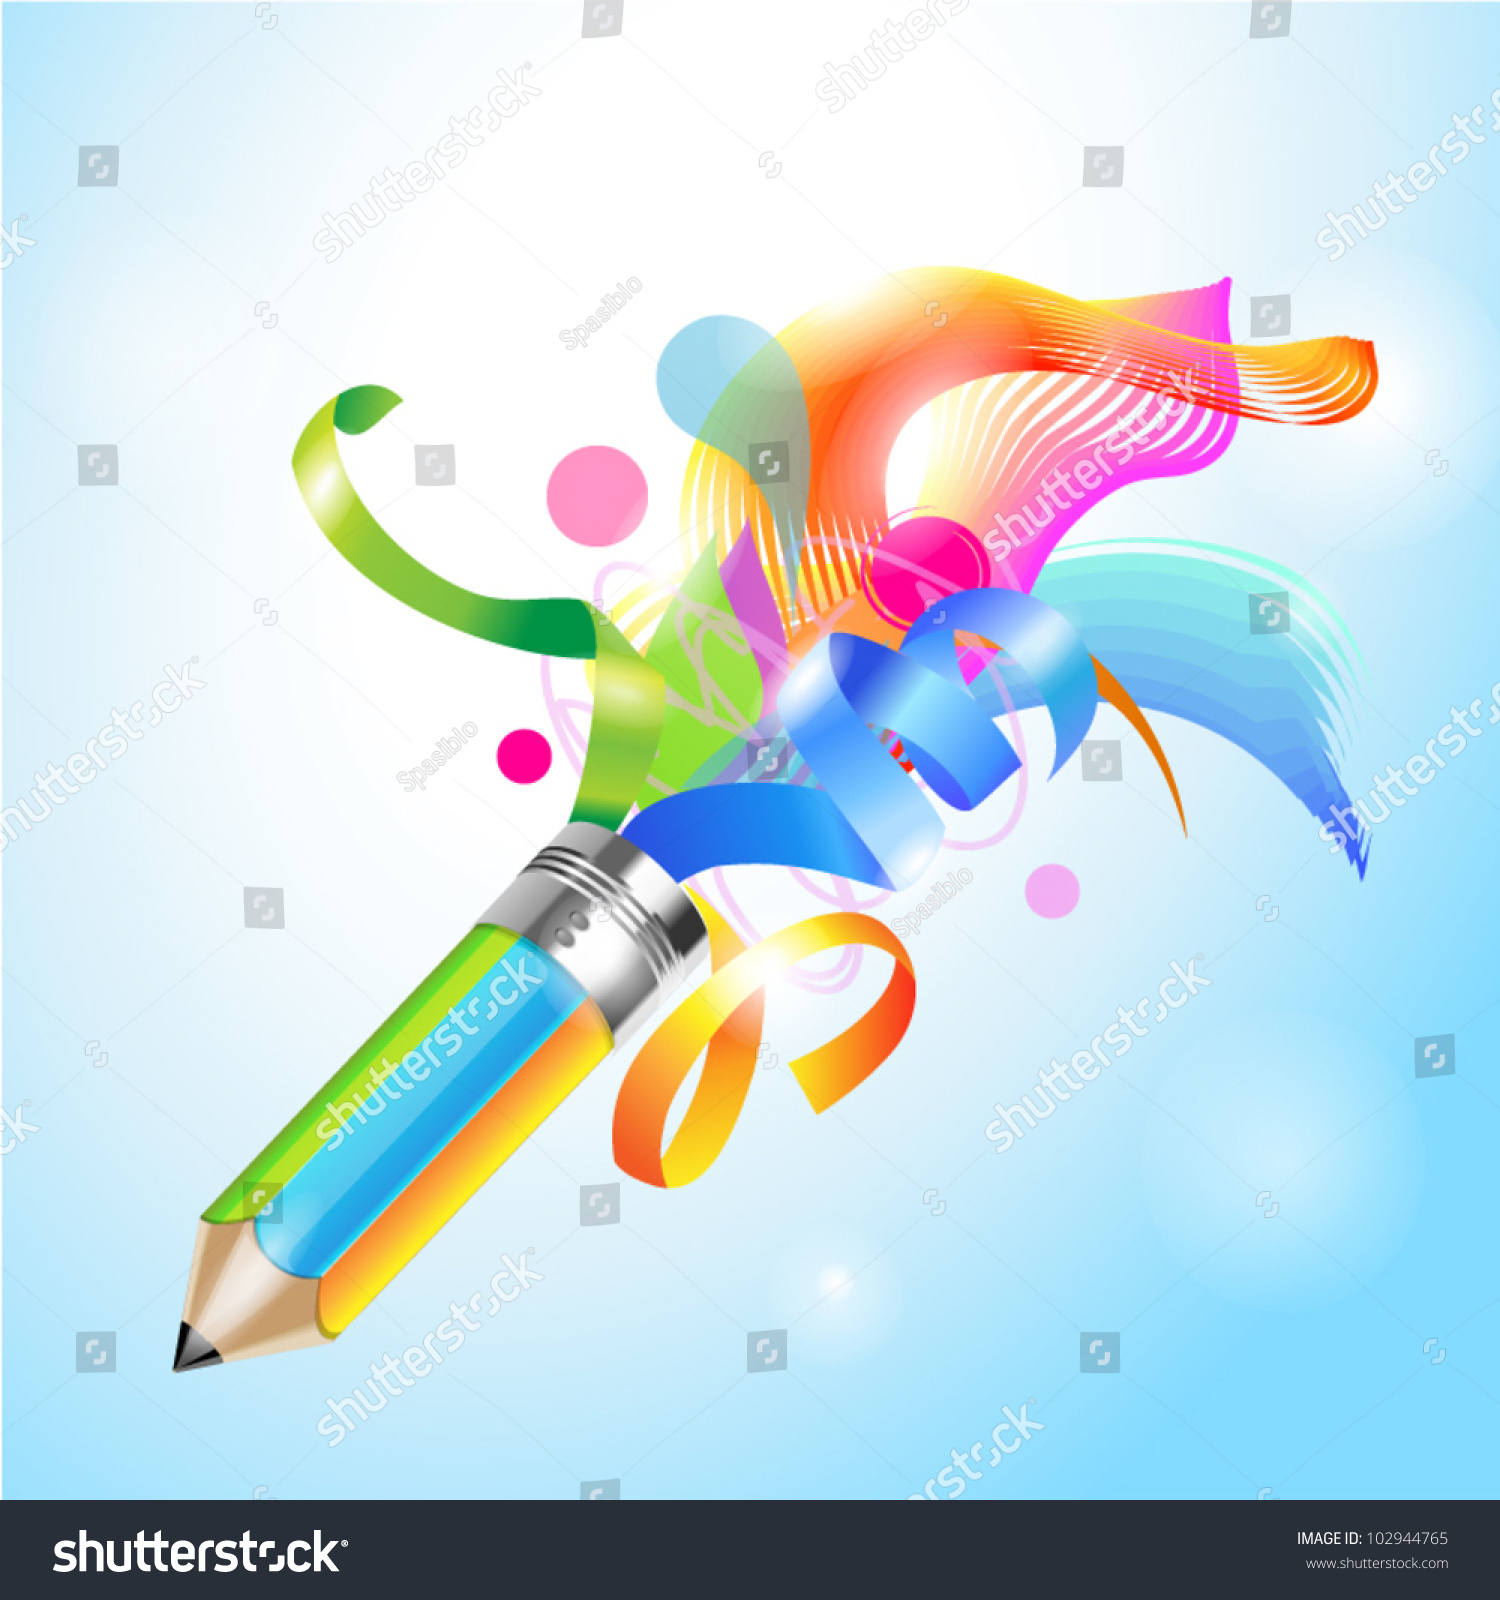 Creative Template With Pencil And Coloured Ribbon Art Concept Vector ...